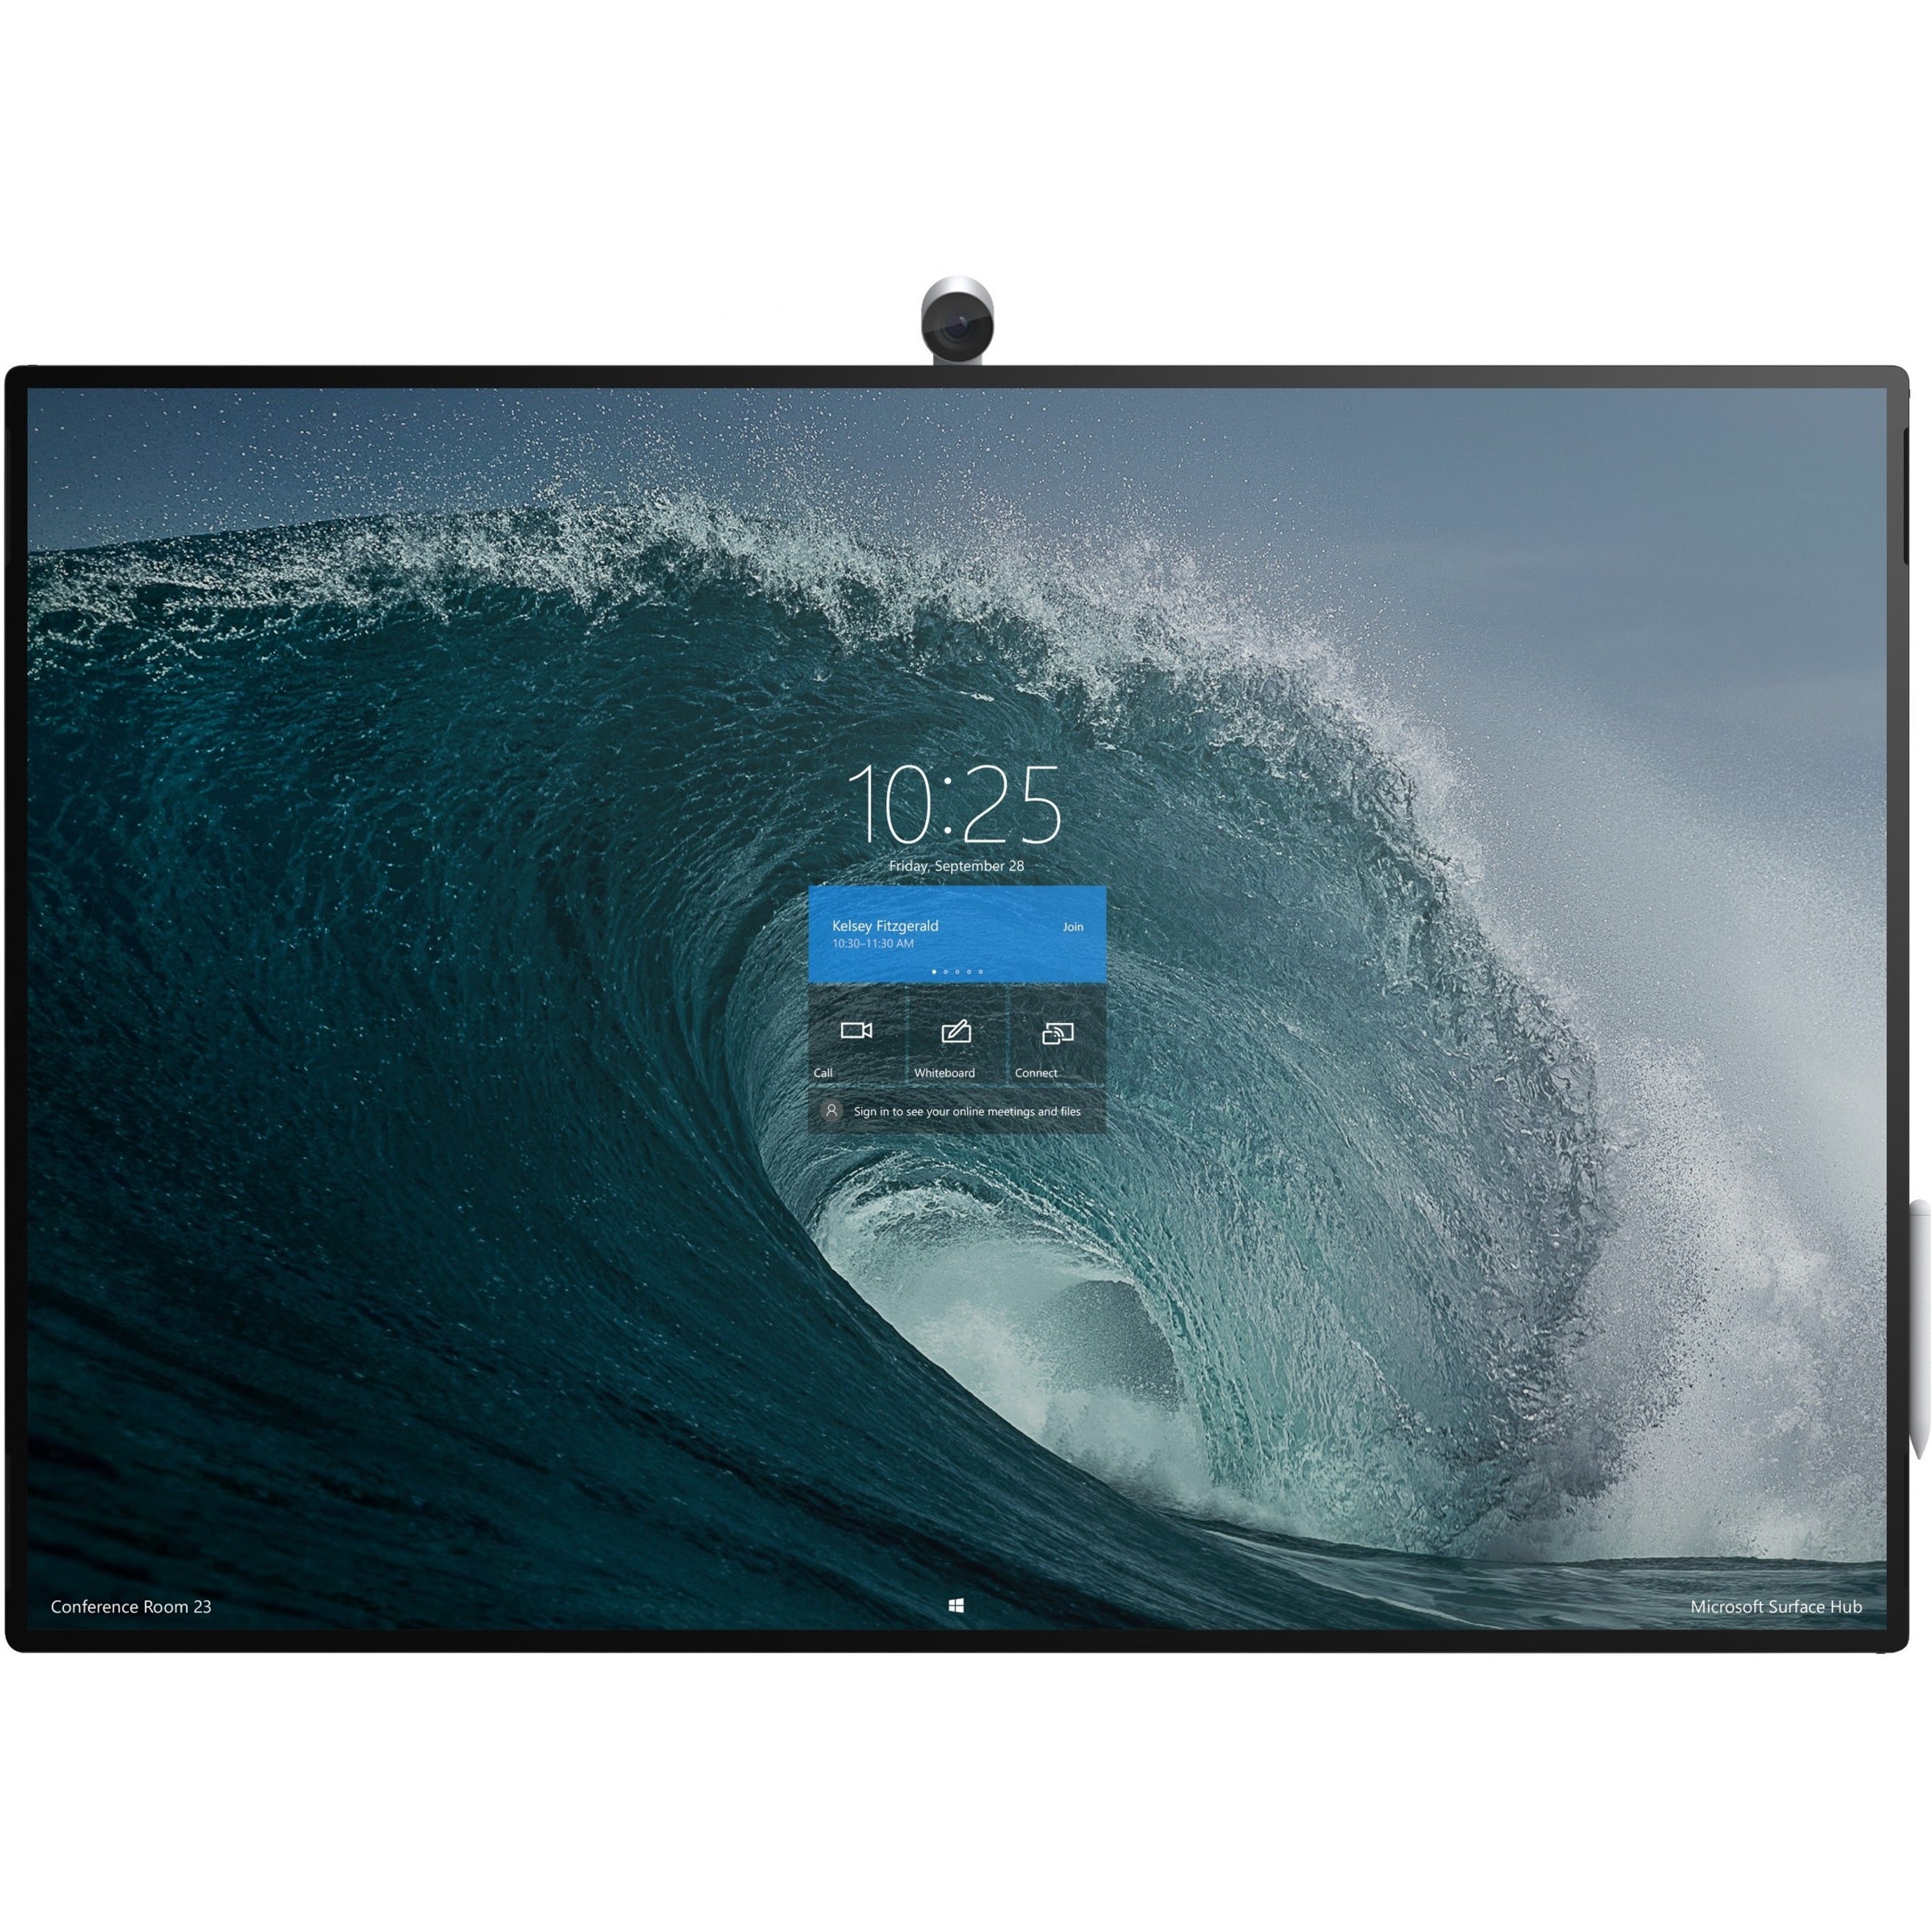 Microsoft 7B4-00002 Surface Hub 2S, 85 4K UHD Touchscreen All-in-One Computer